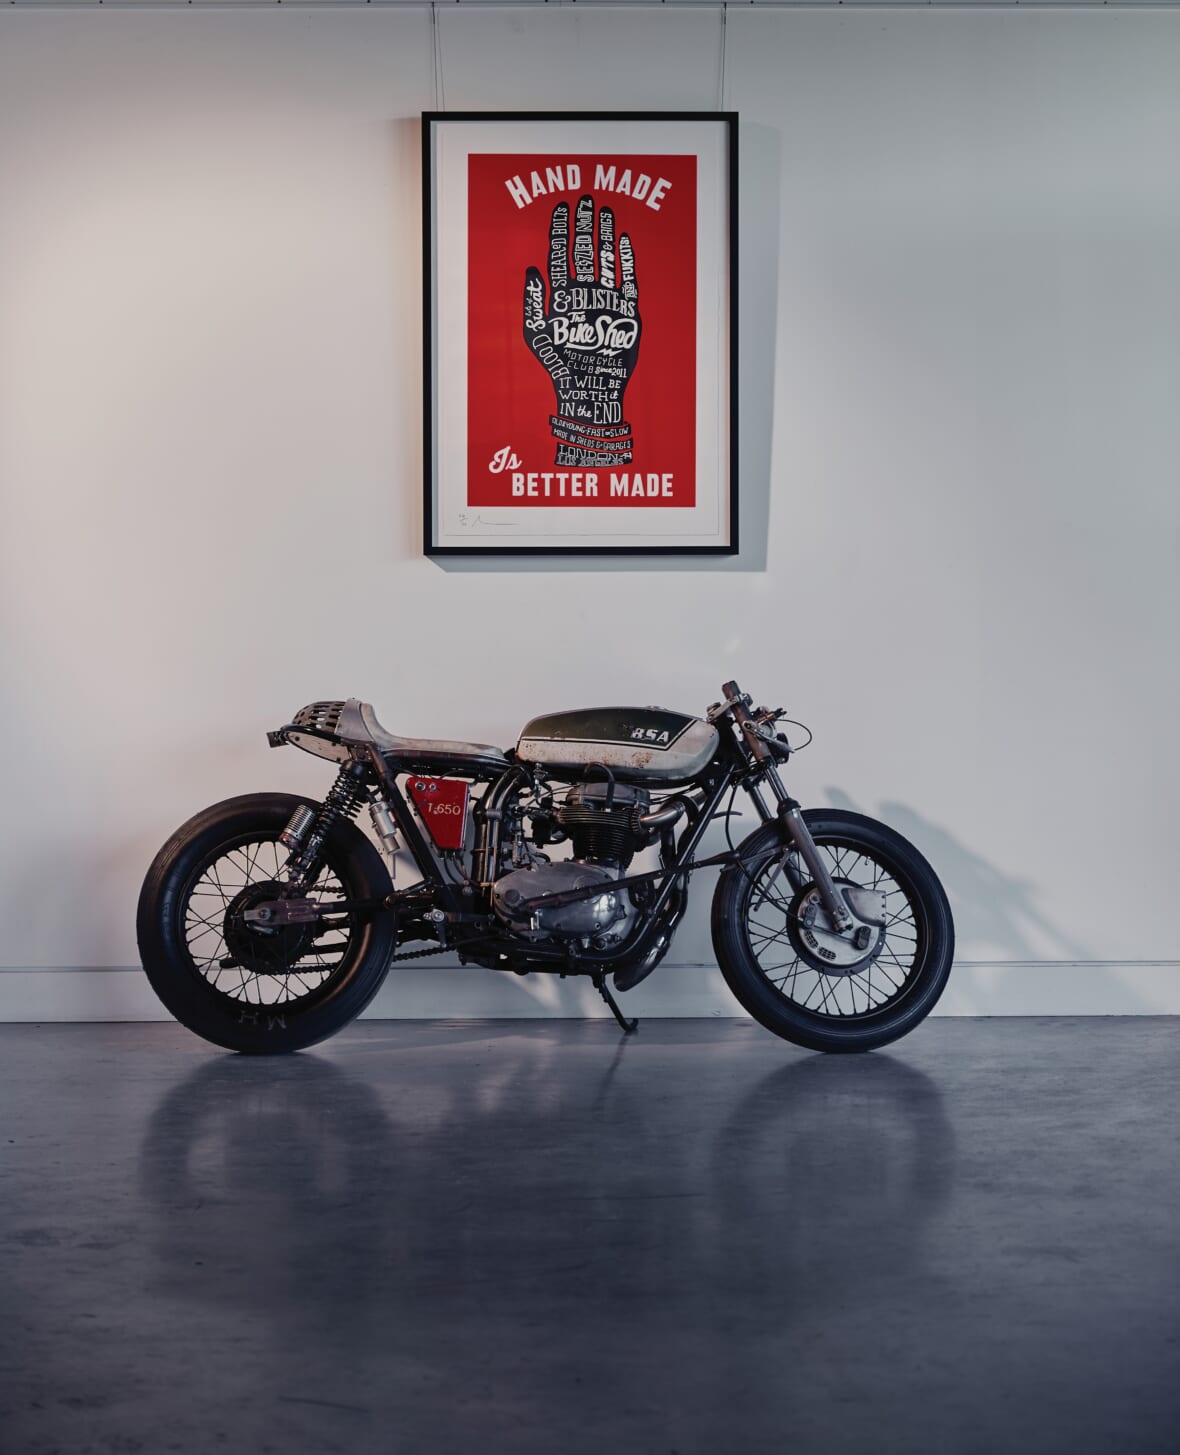 BikeShedLA Event Space and Art Gallery Atrium 03 Photo Credit JohnRyanHebert L.A.'s Bike Shed Moto. Co. Is The Ultimate Motorcycle Lifestyle